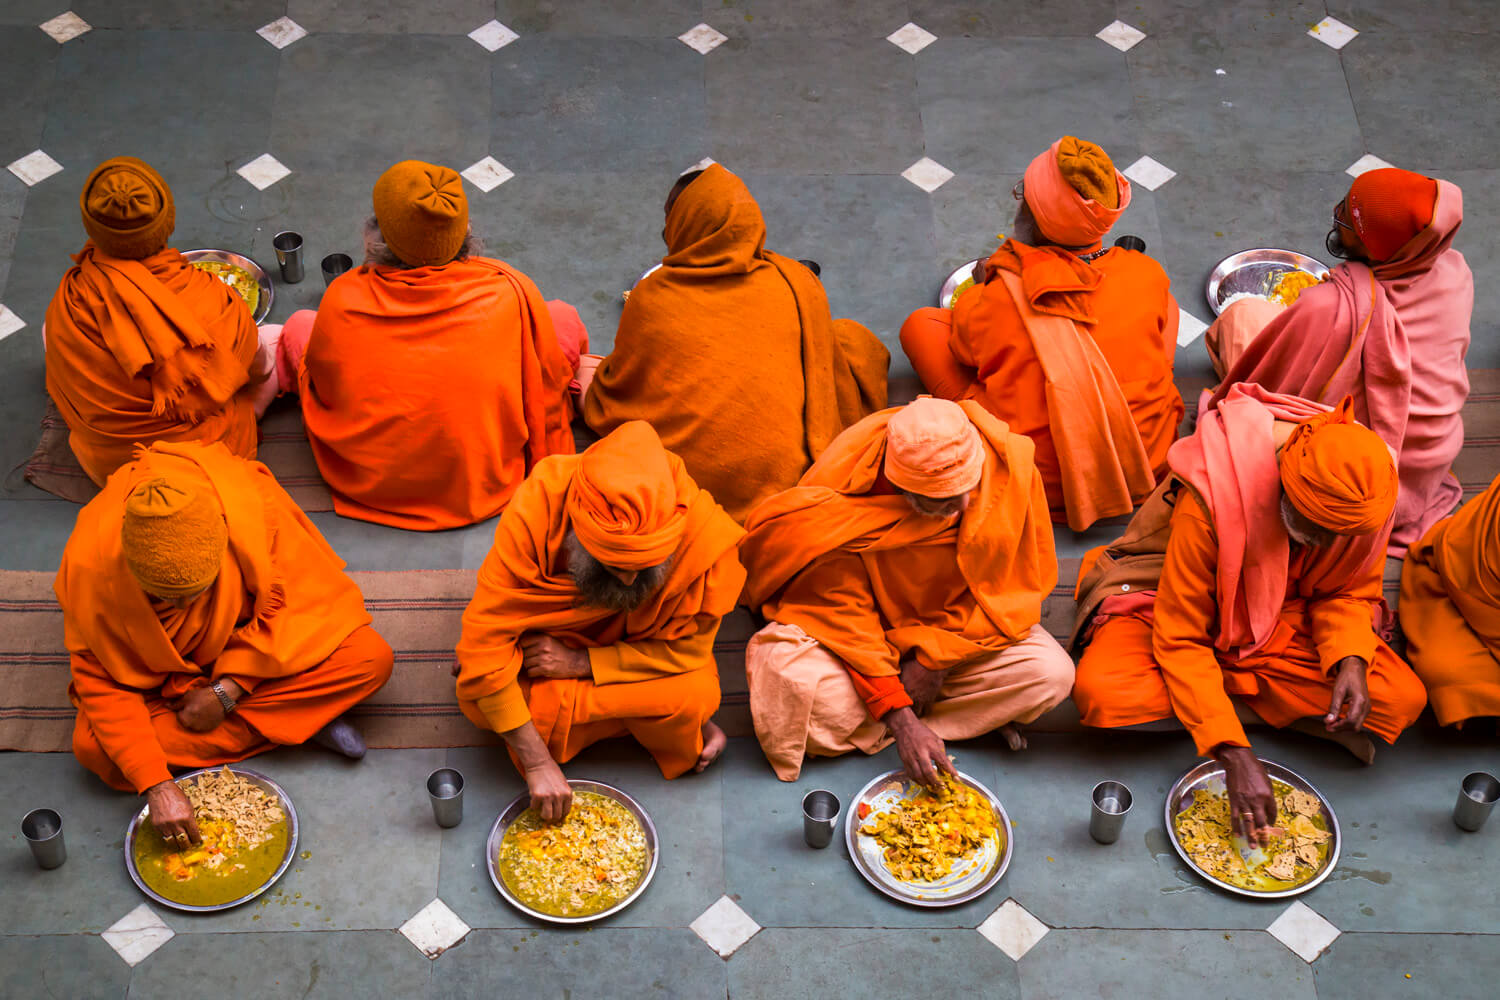 A group of monks clad in vibrant orange robes are seated on the ground in a row, eating from large metal bowls. The scene is captured from above, with the monks' matching attire creating a striking contrast against the grey floor marked with white diamonds.